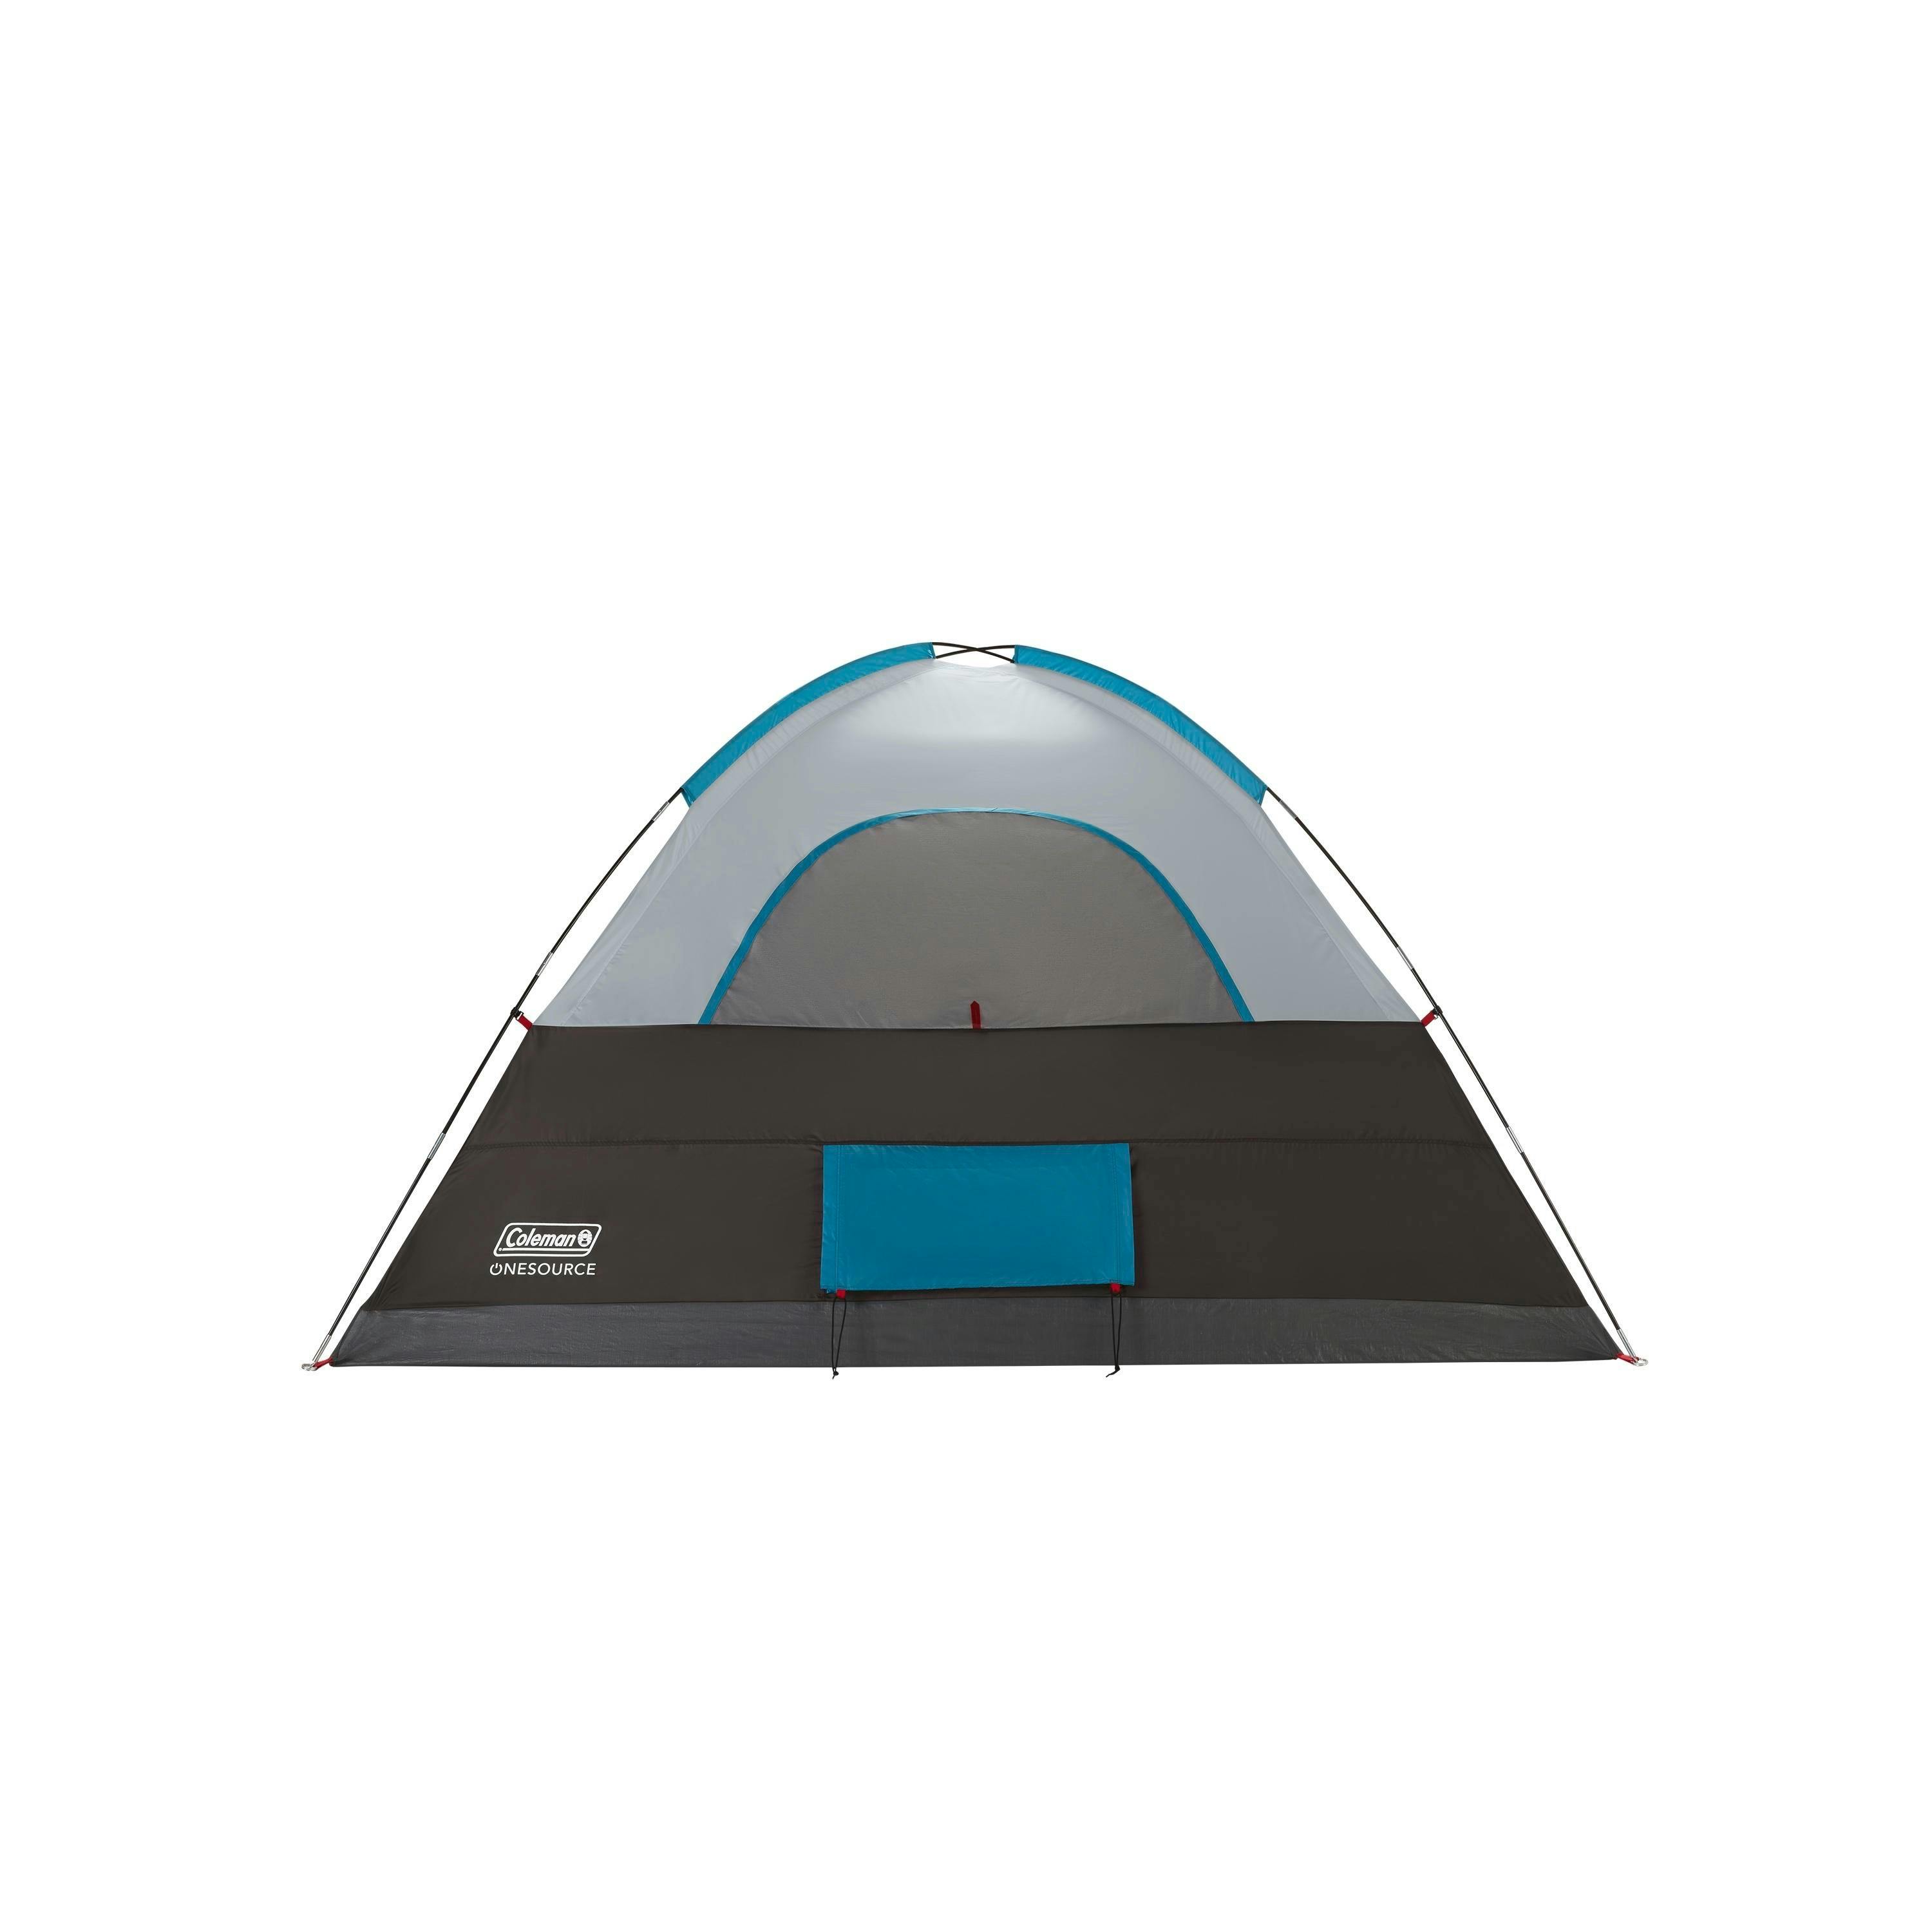 Coleman OneSource Camping Dome Tent with Airflow System and LED Lighting  6 Person  Black/White/Carribbean Blue